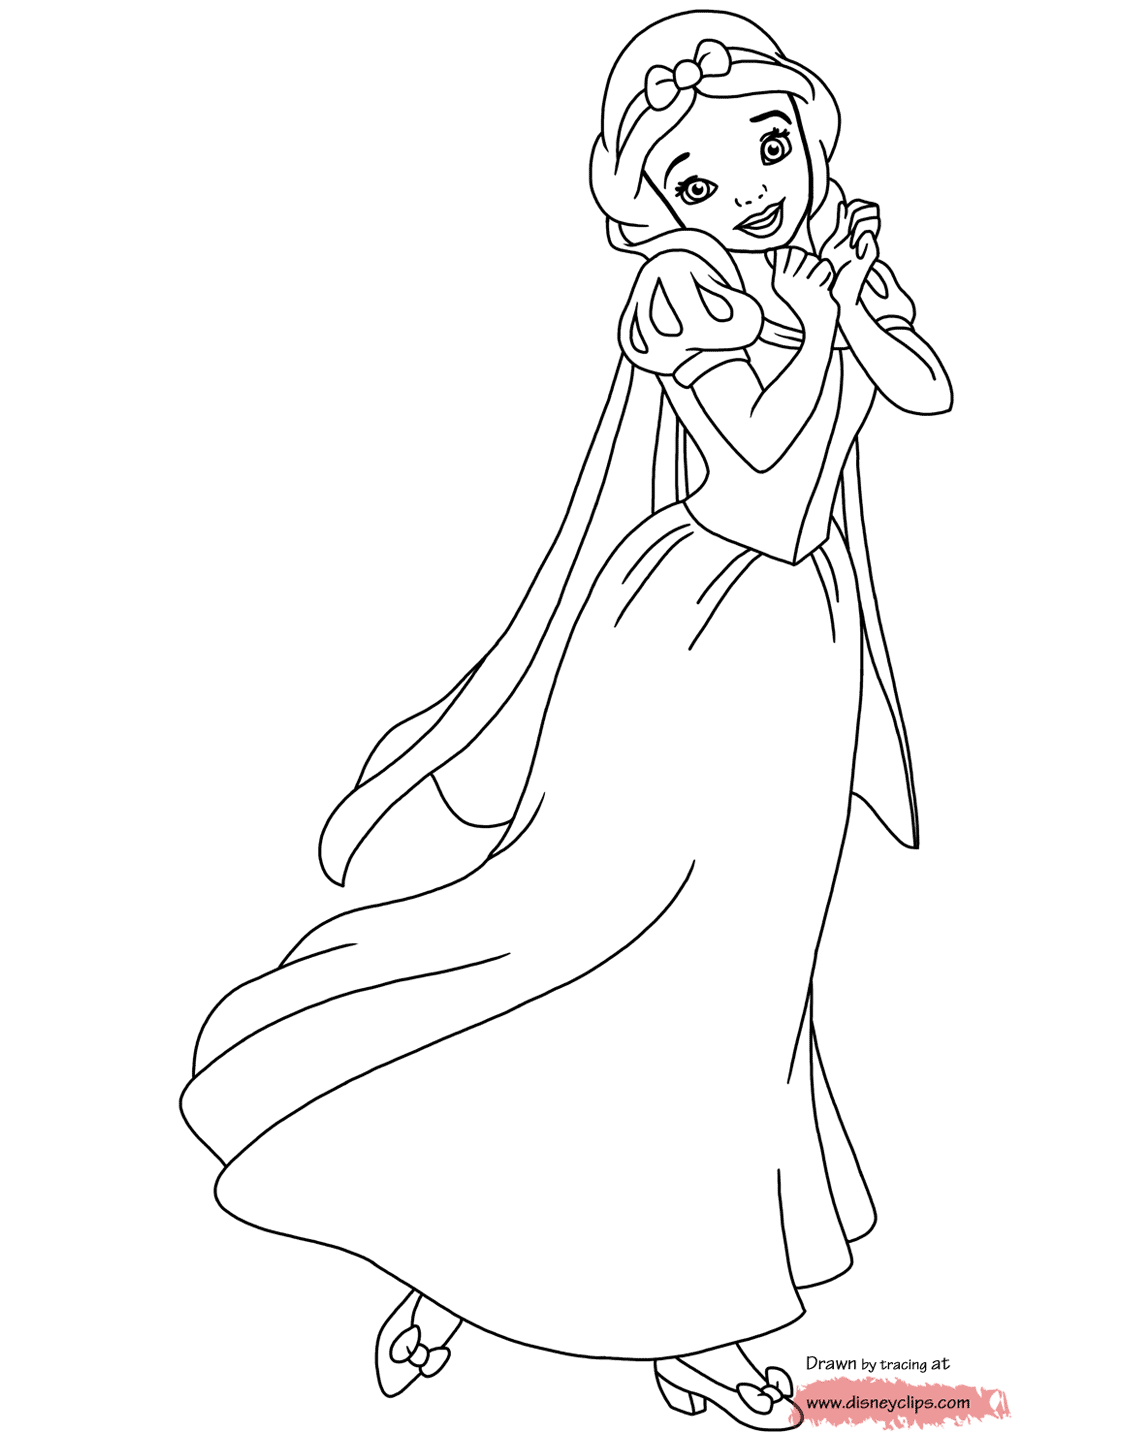 snow white coloring pages to print. Coloring pages